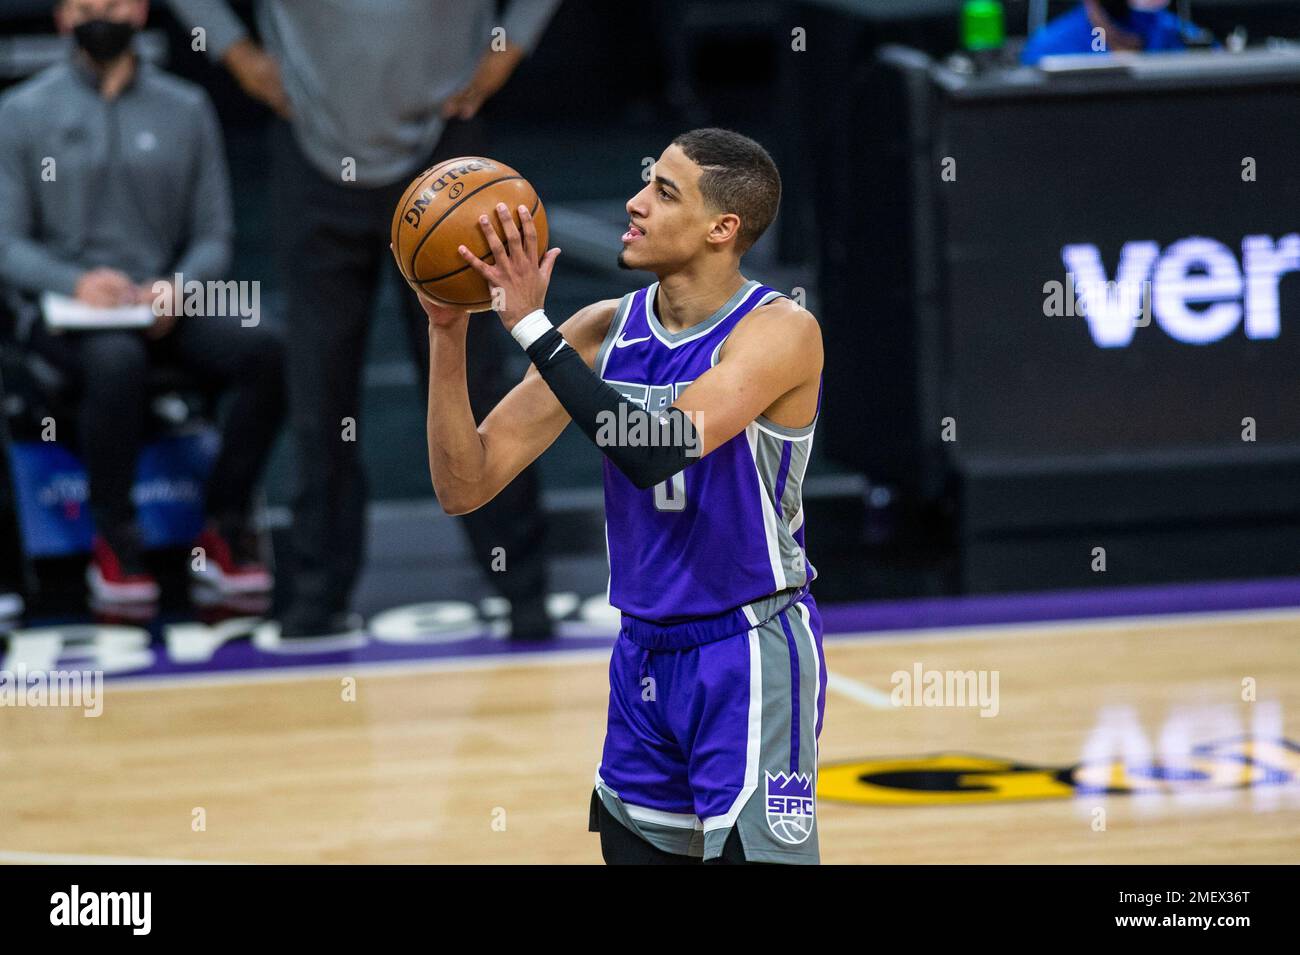 Tyrese Haliburton: Basketball is different when you play for the